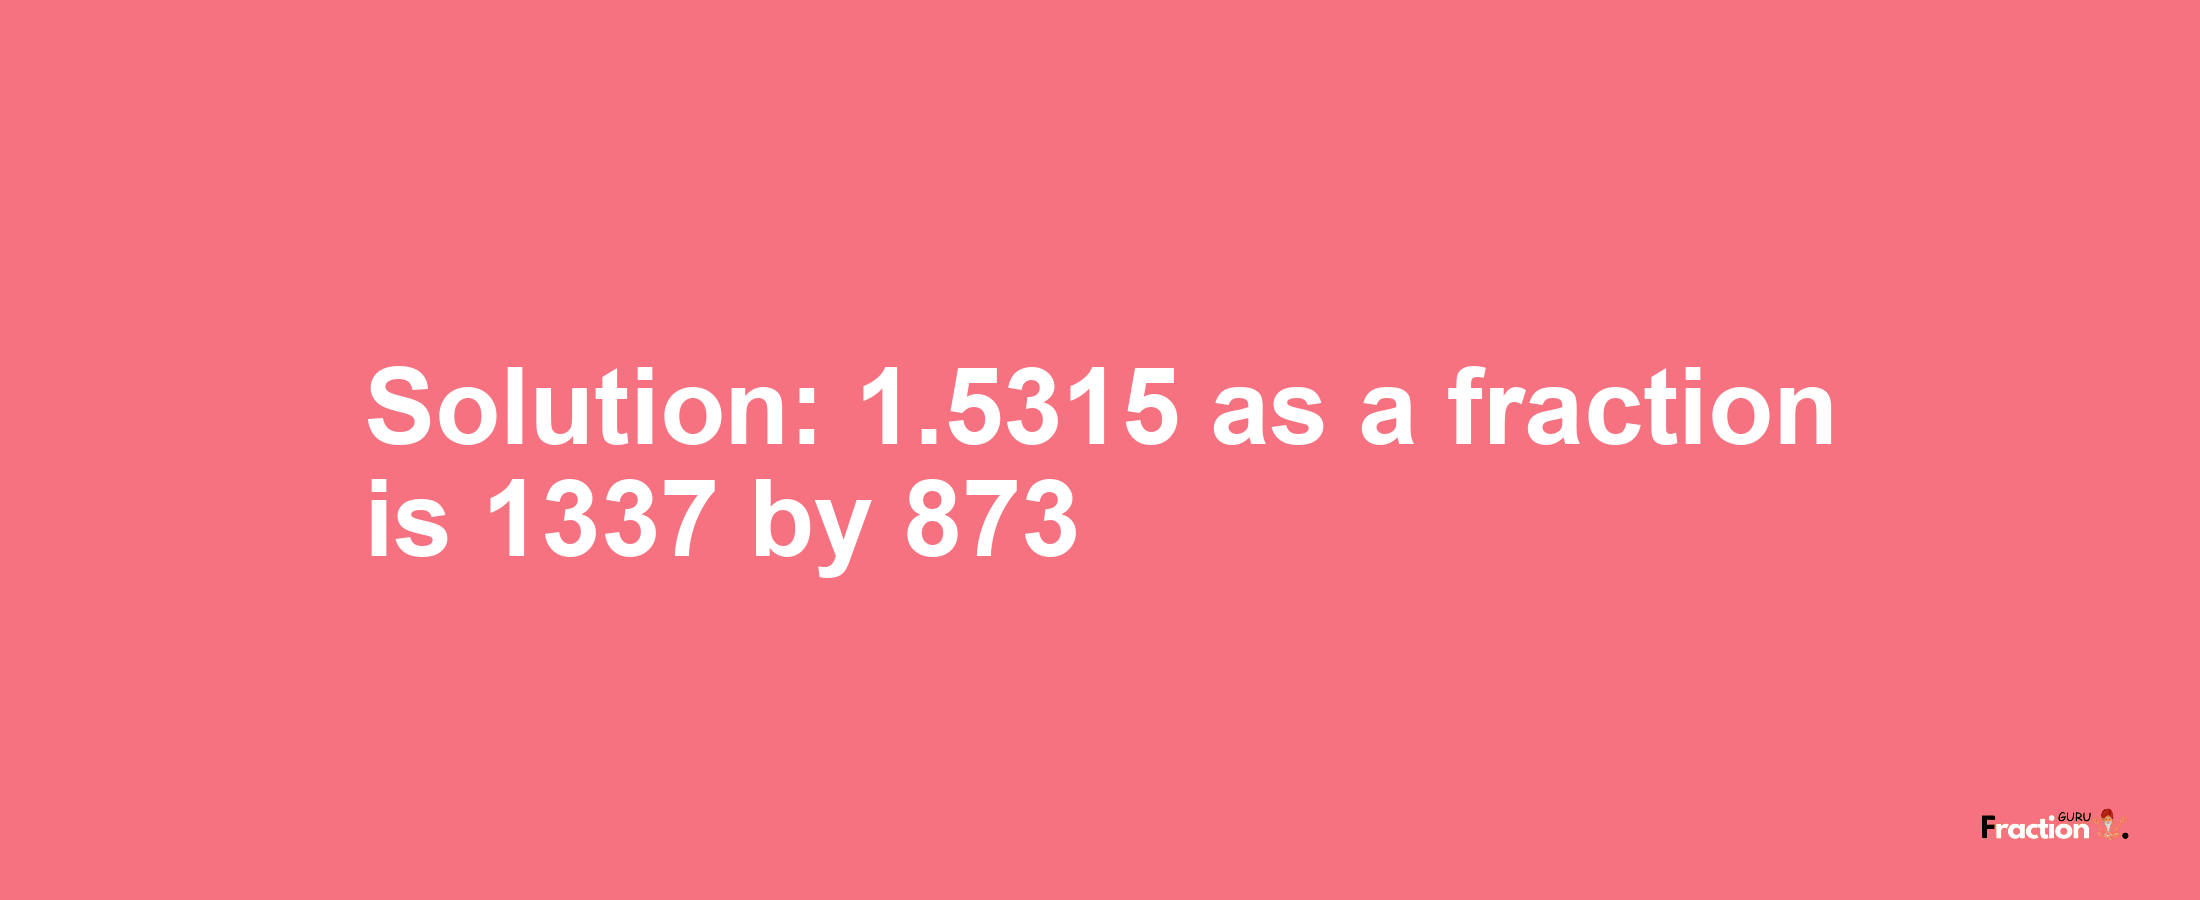 Solution:1.5315 as a fraction is 1337/873